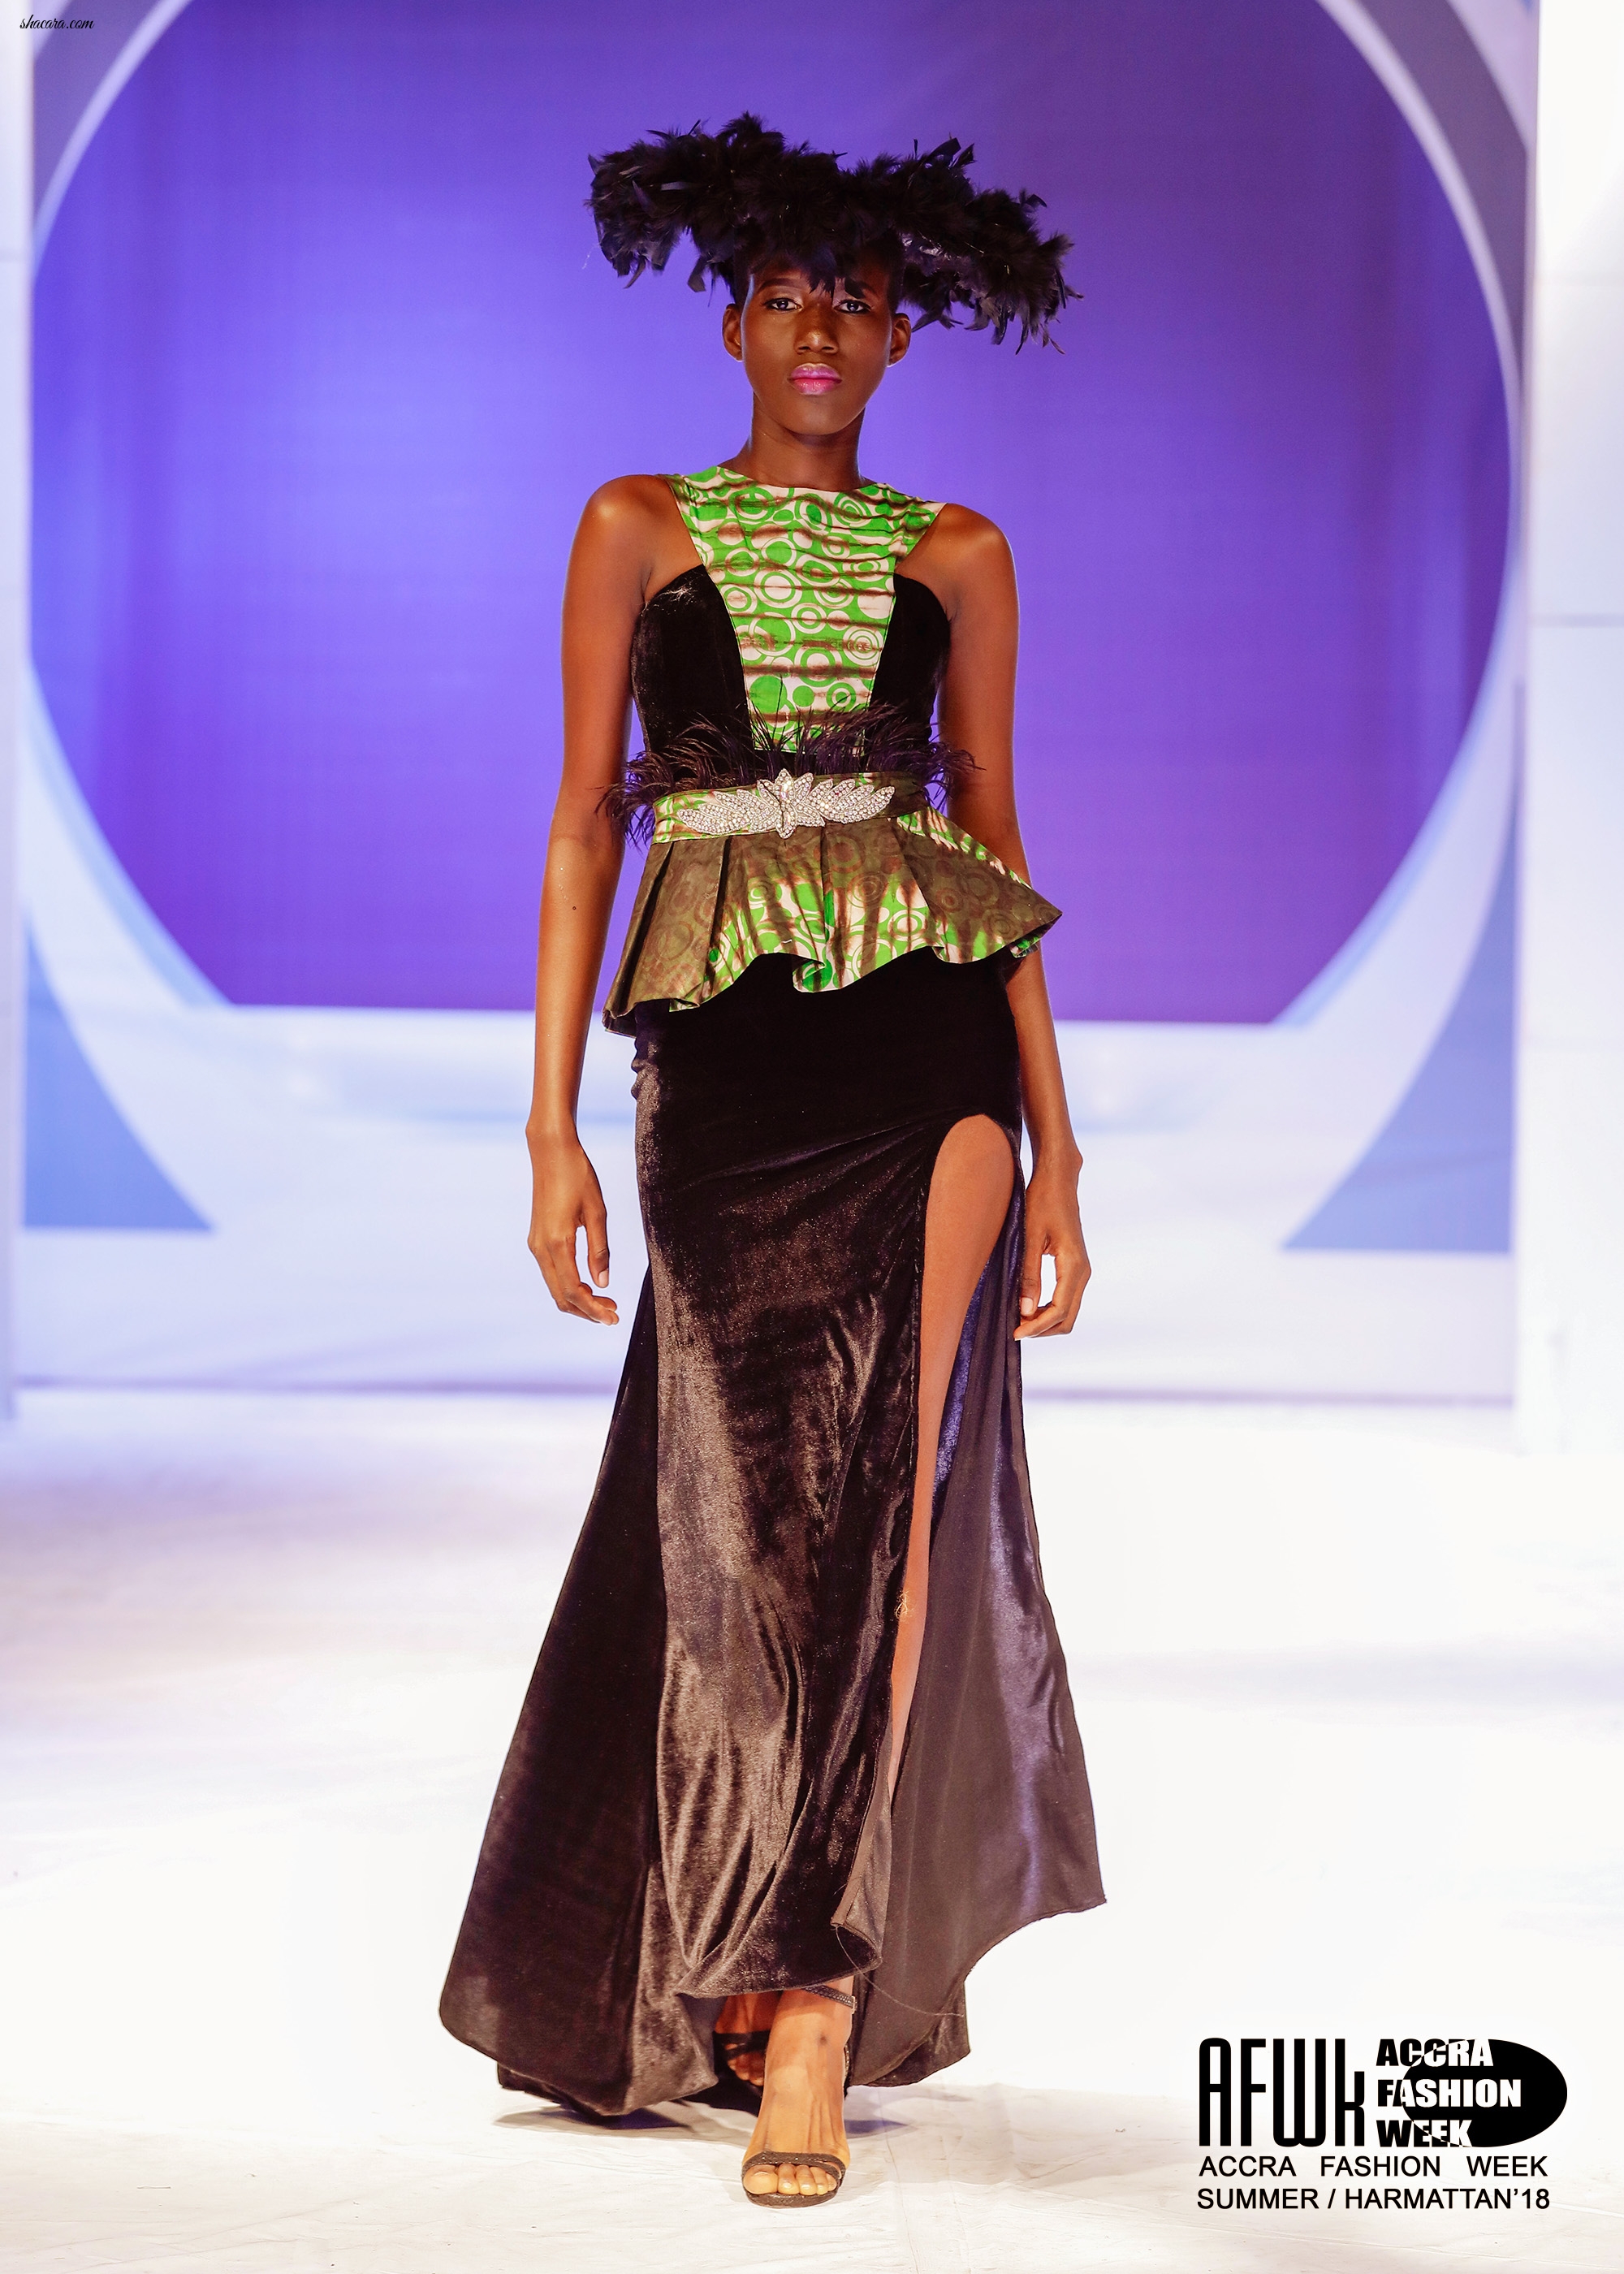 Africa Prepares For The Biggest Fashion Festival Set For In March, Accra Fashion Week!